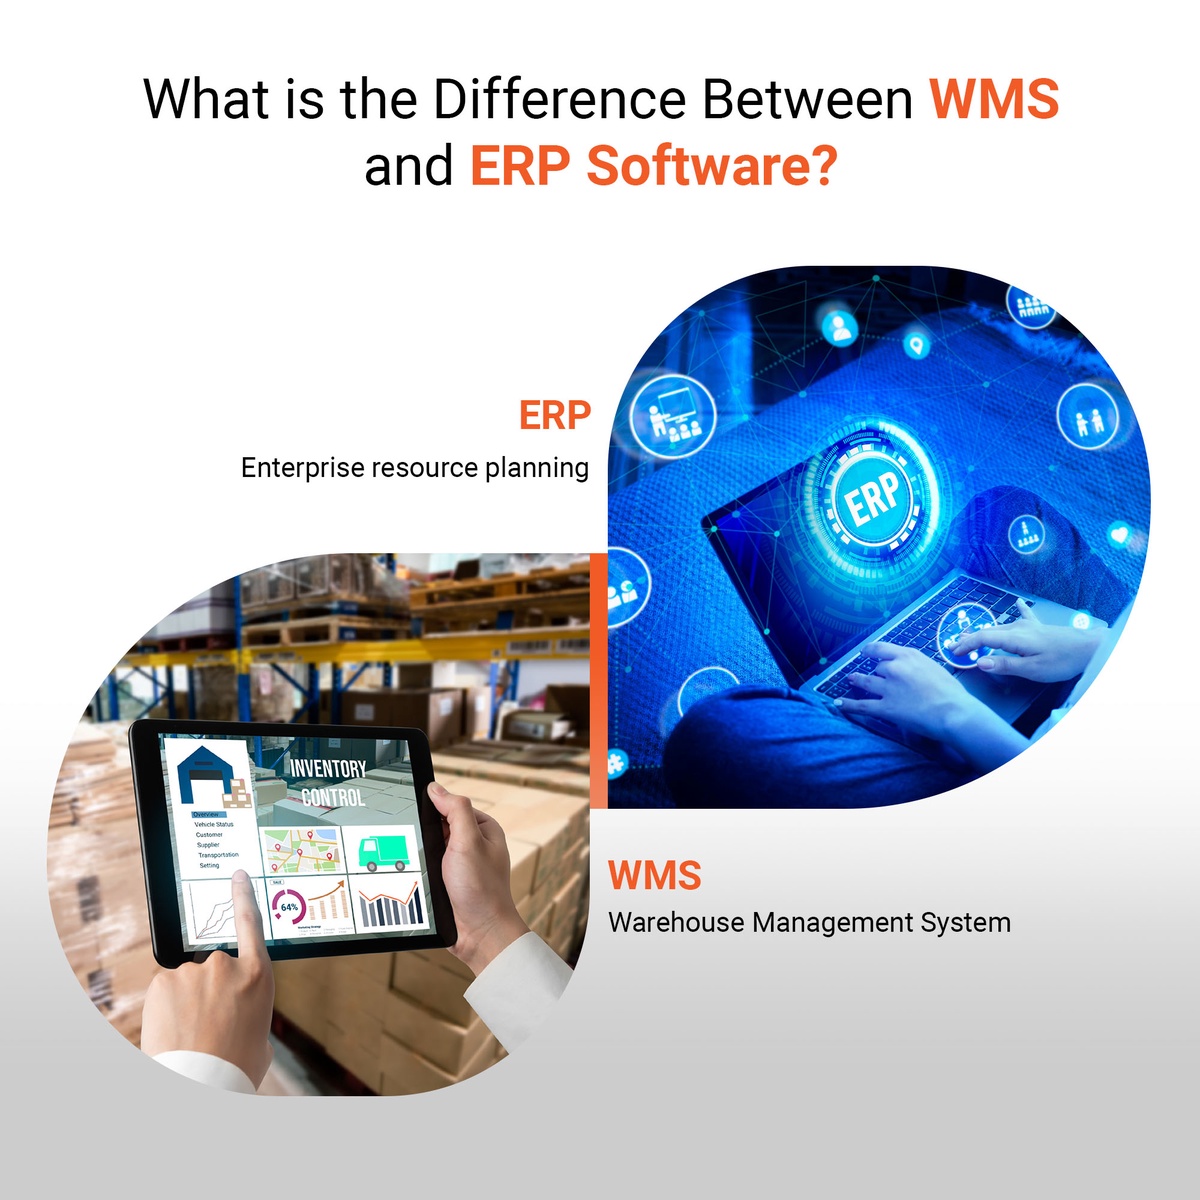 What is the Difference Between WMS and ERP Software?